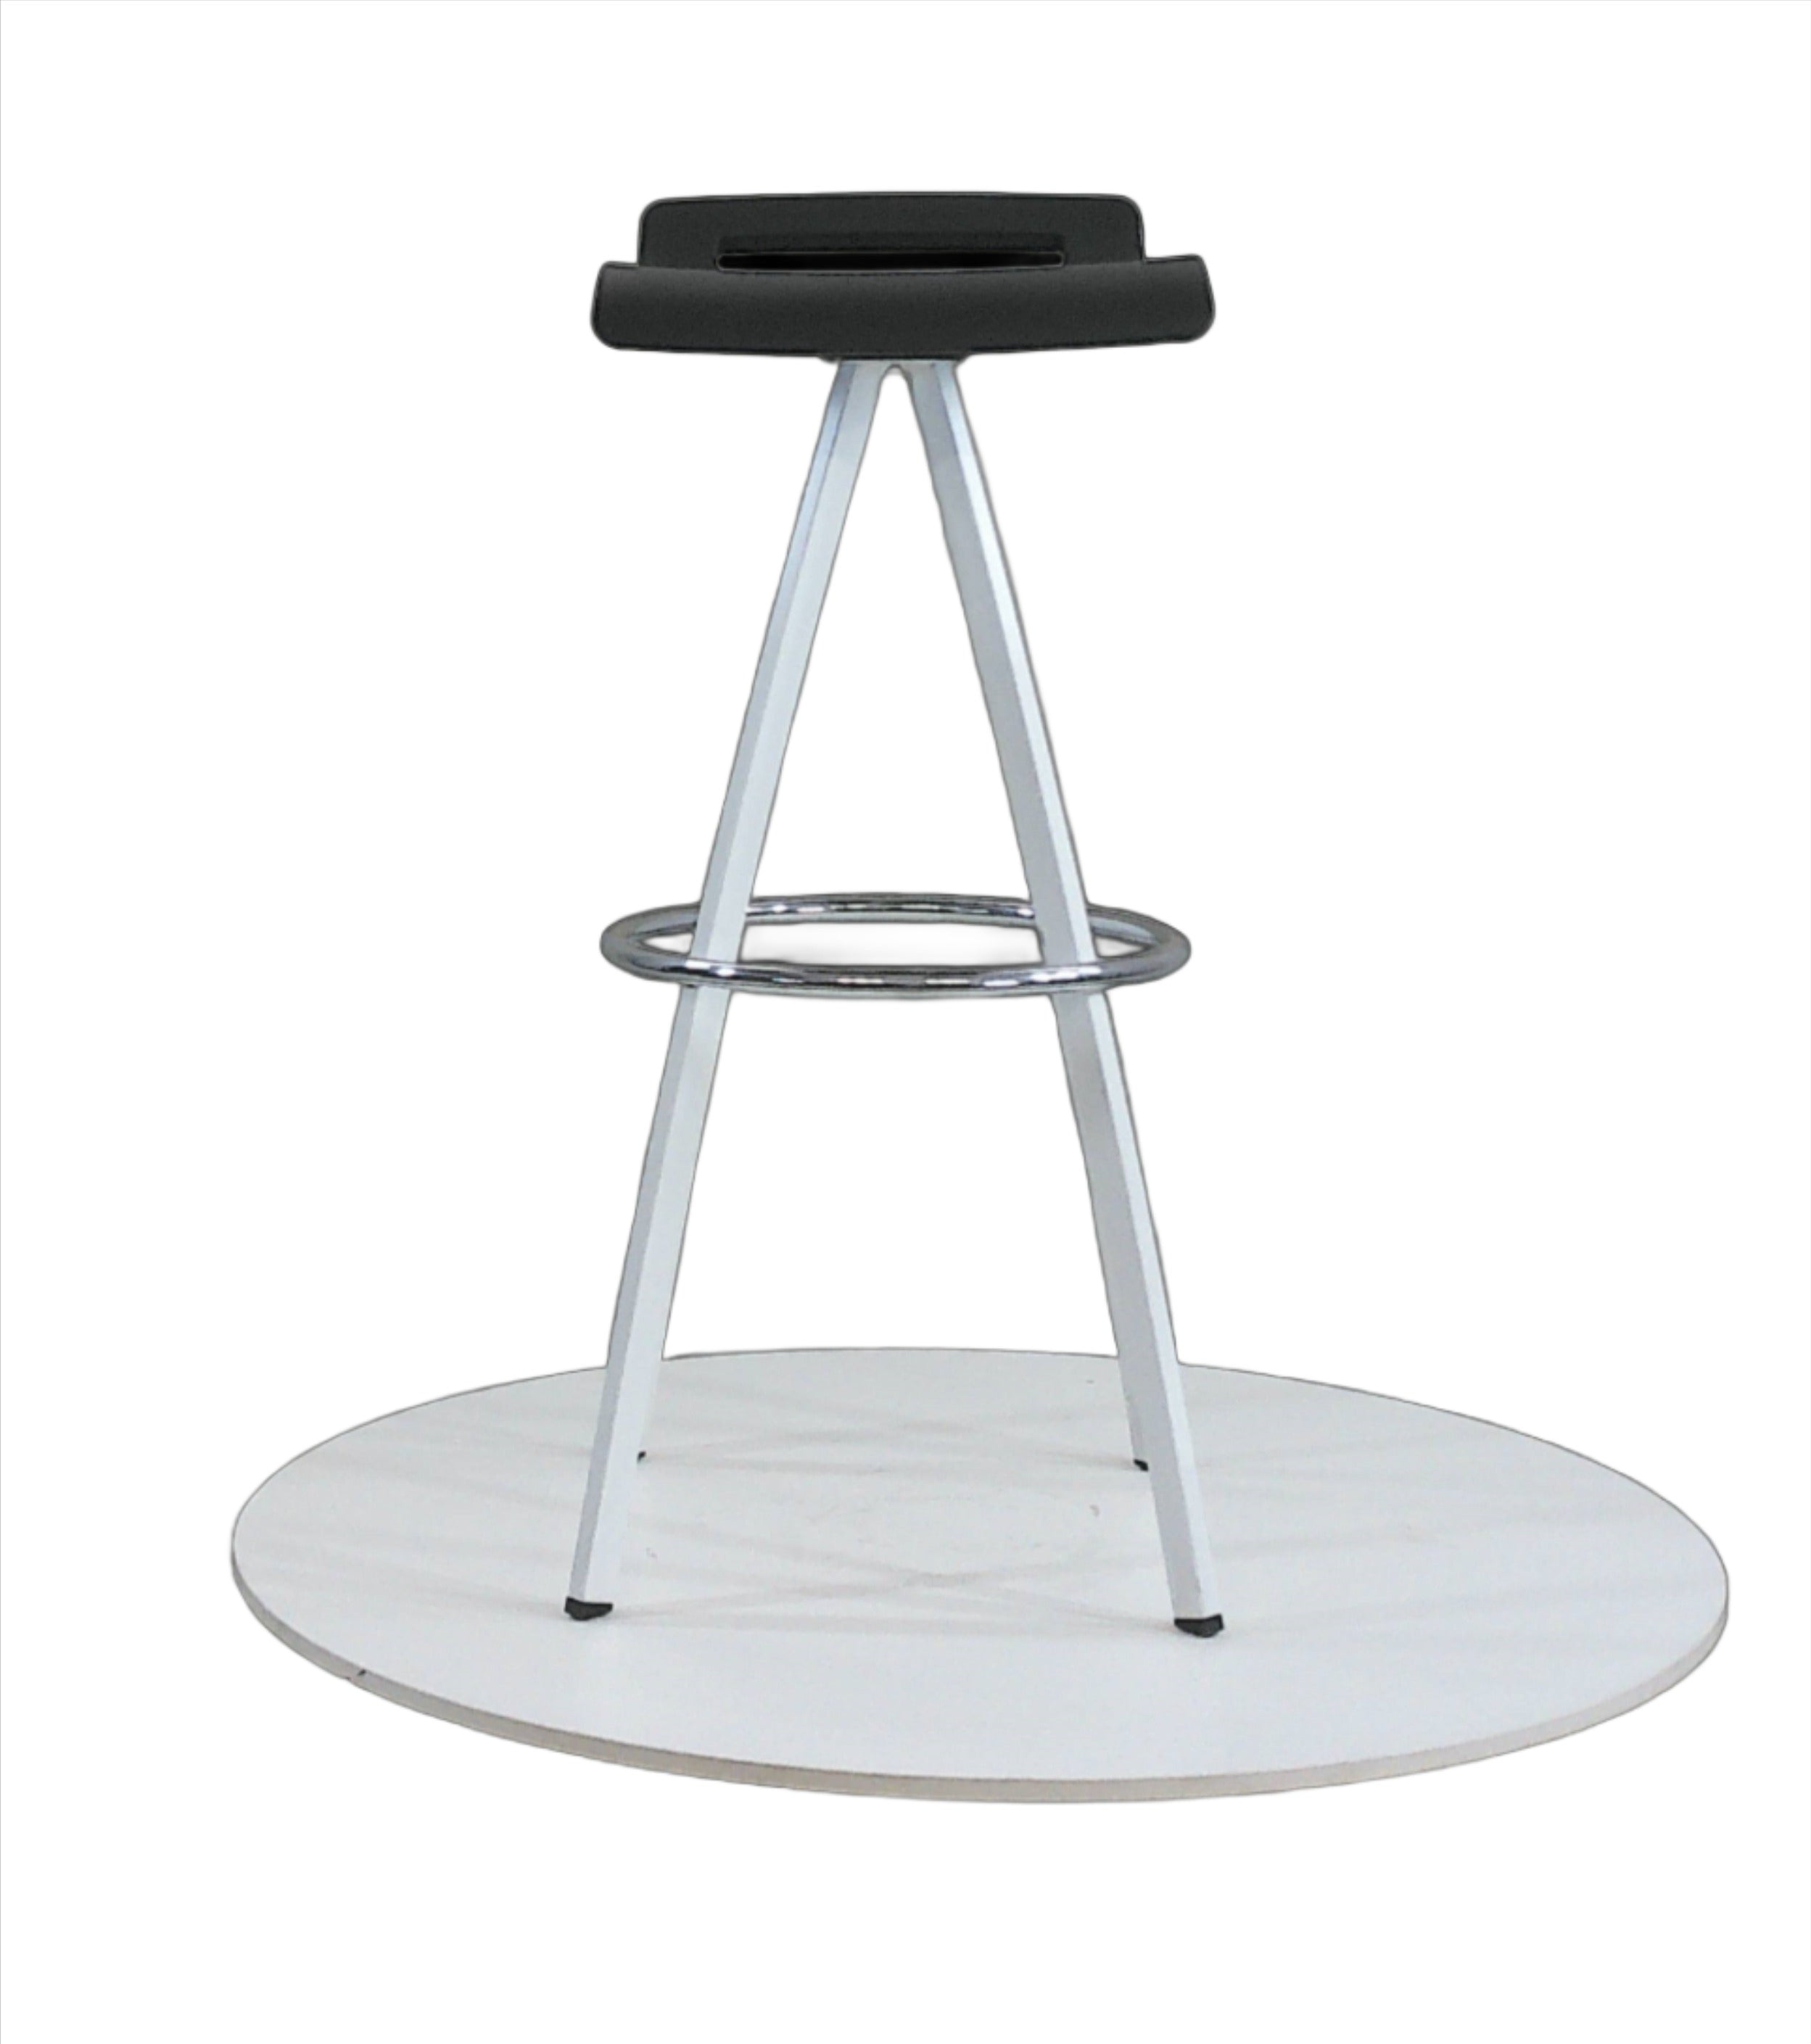 Bar stool with white powder coated 4 leg base and black seat with low back on a grey background